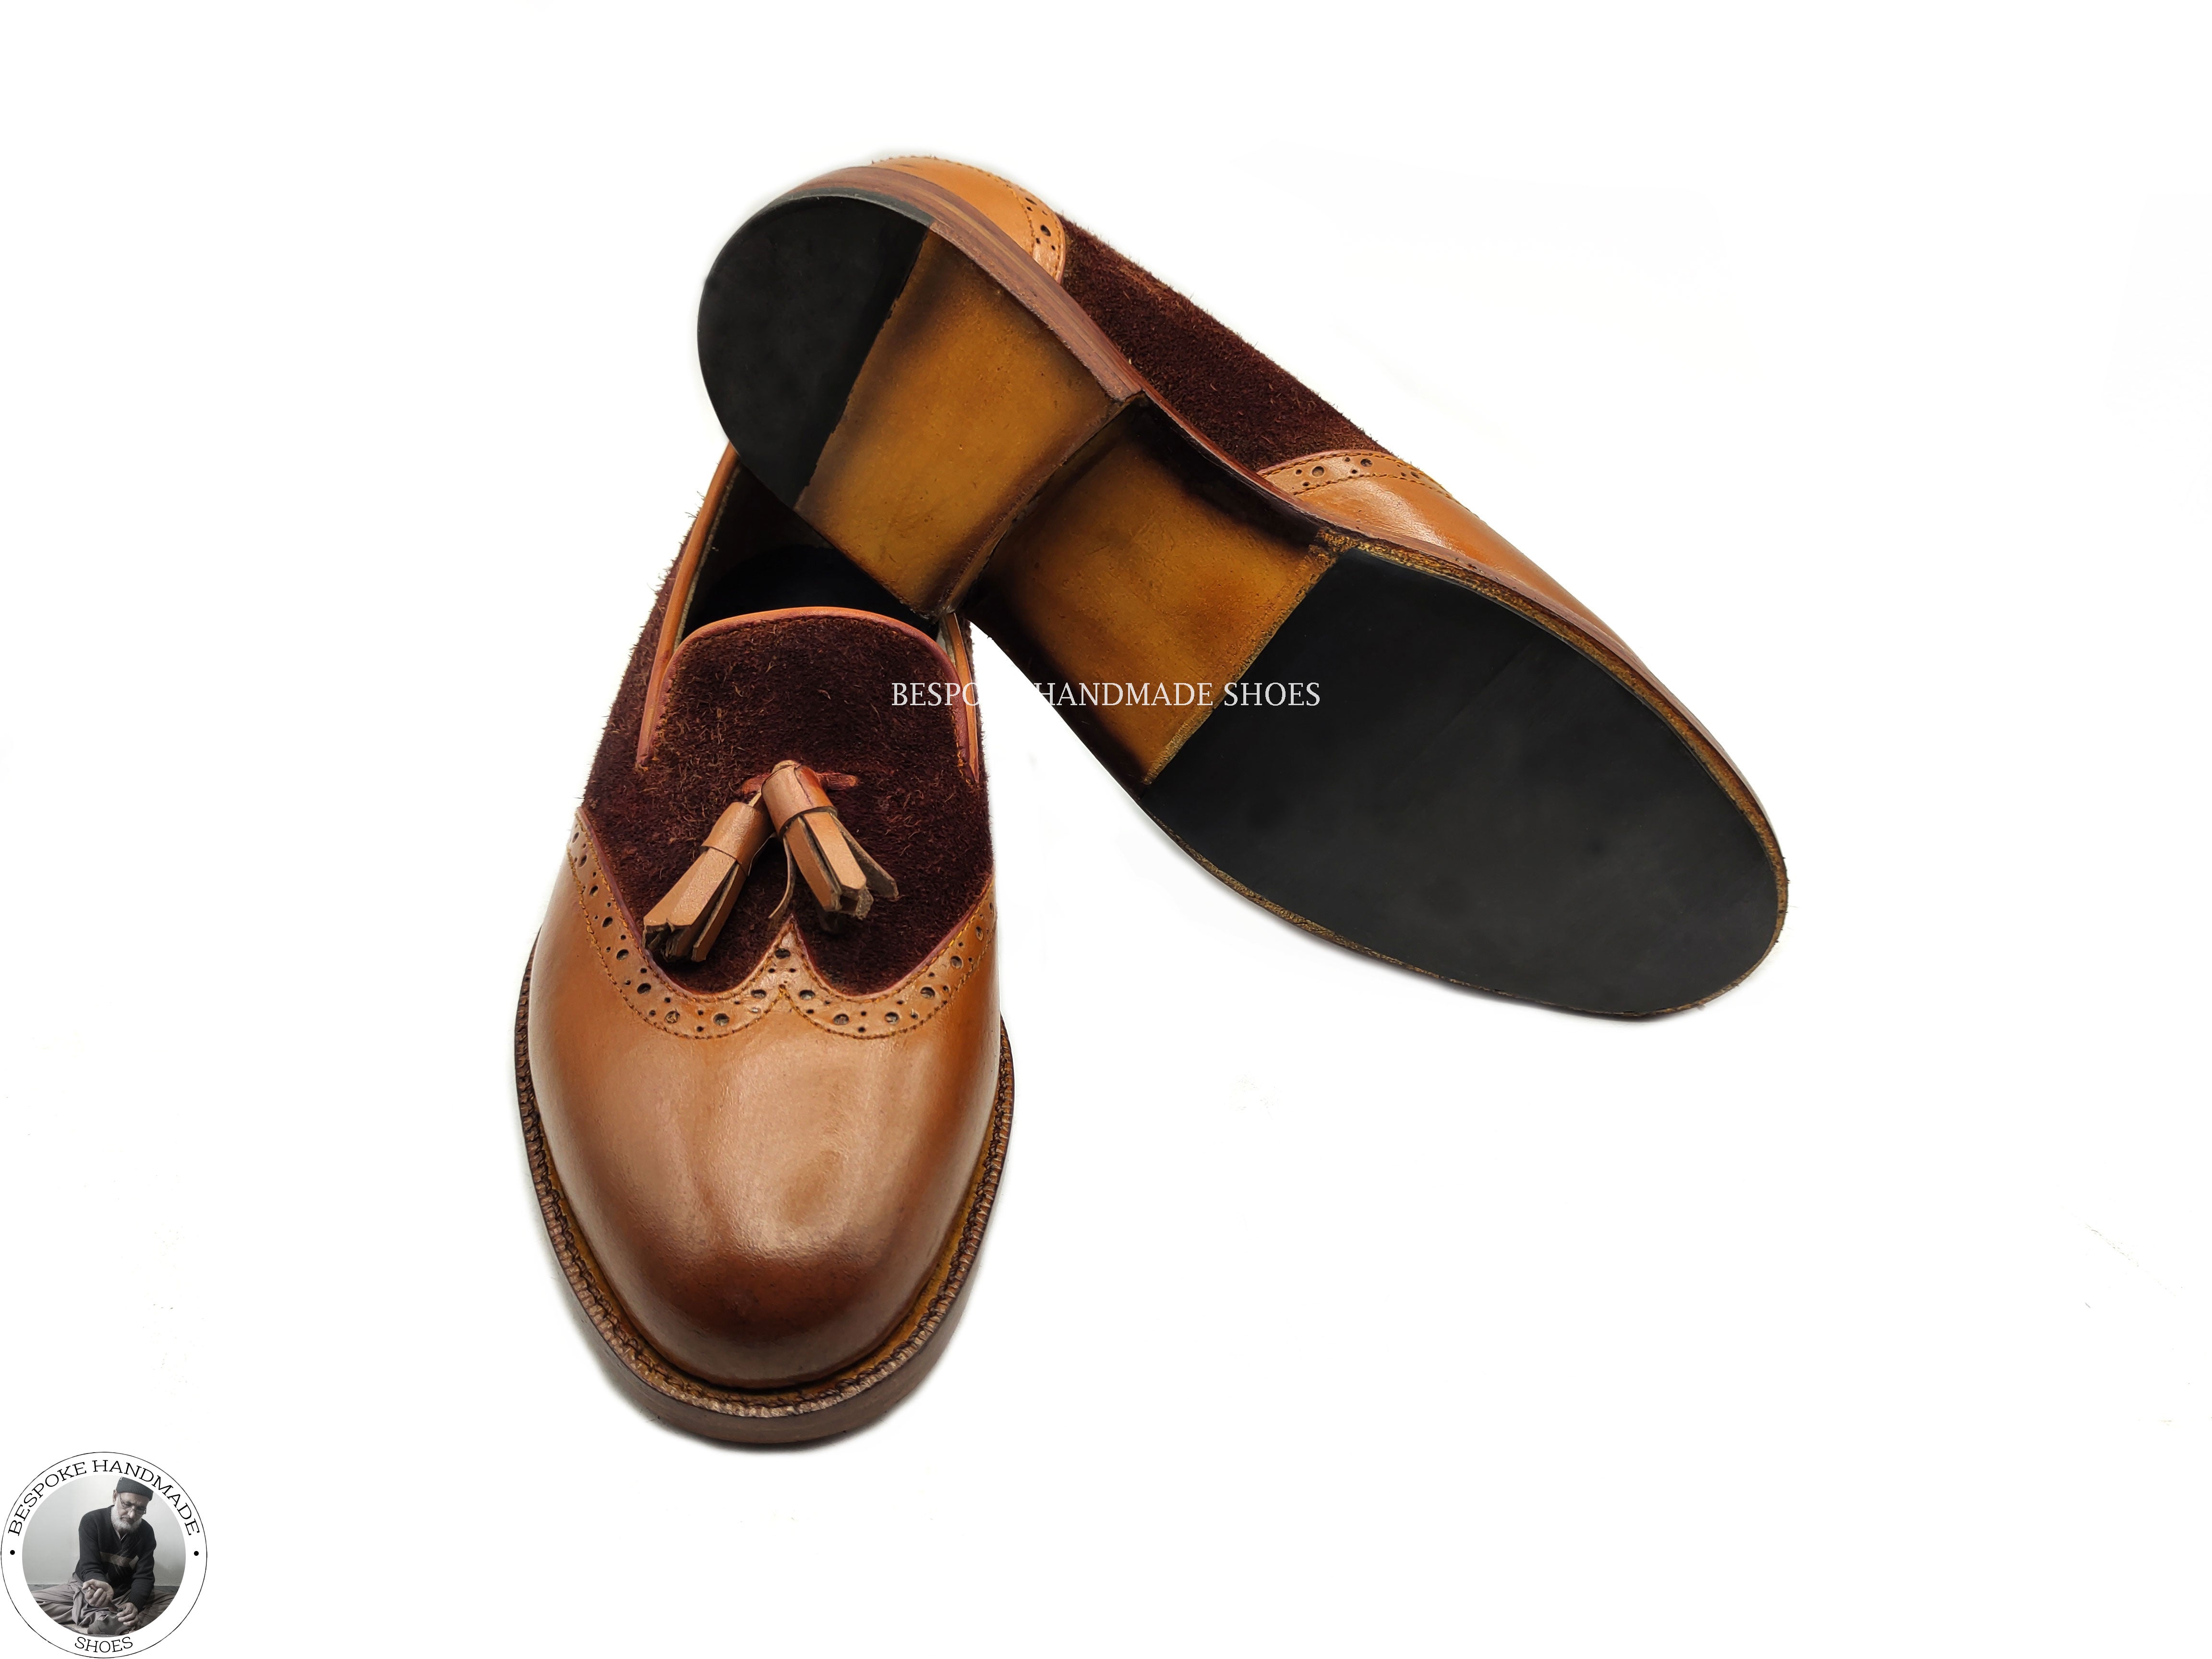 Bespoke Handmade Stylish Brown Leather And Suede Loafer Style Leather Tassels Casual Shoes